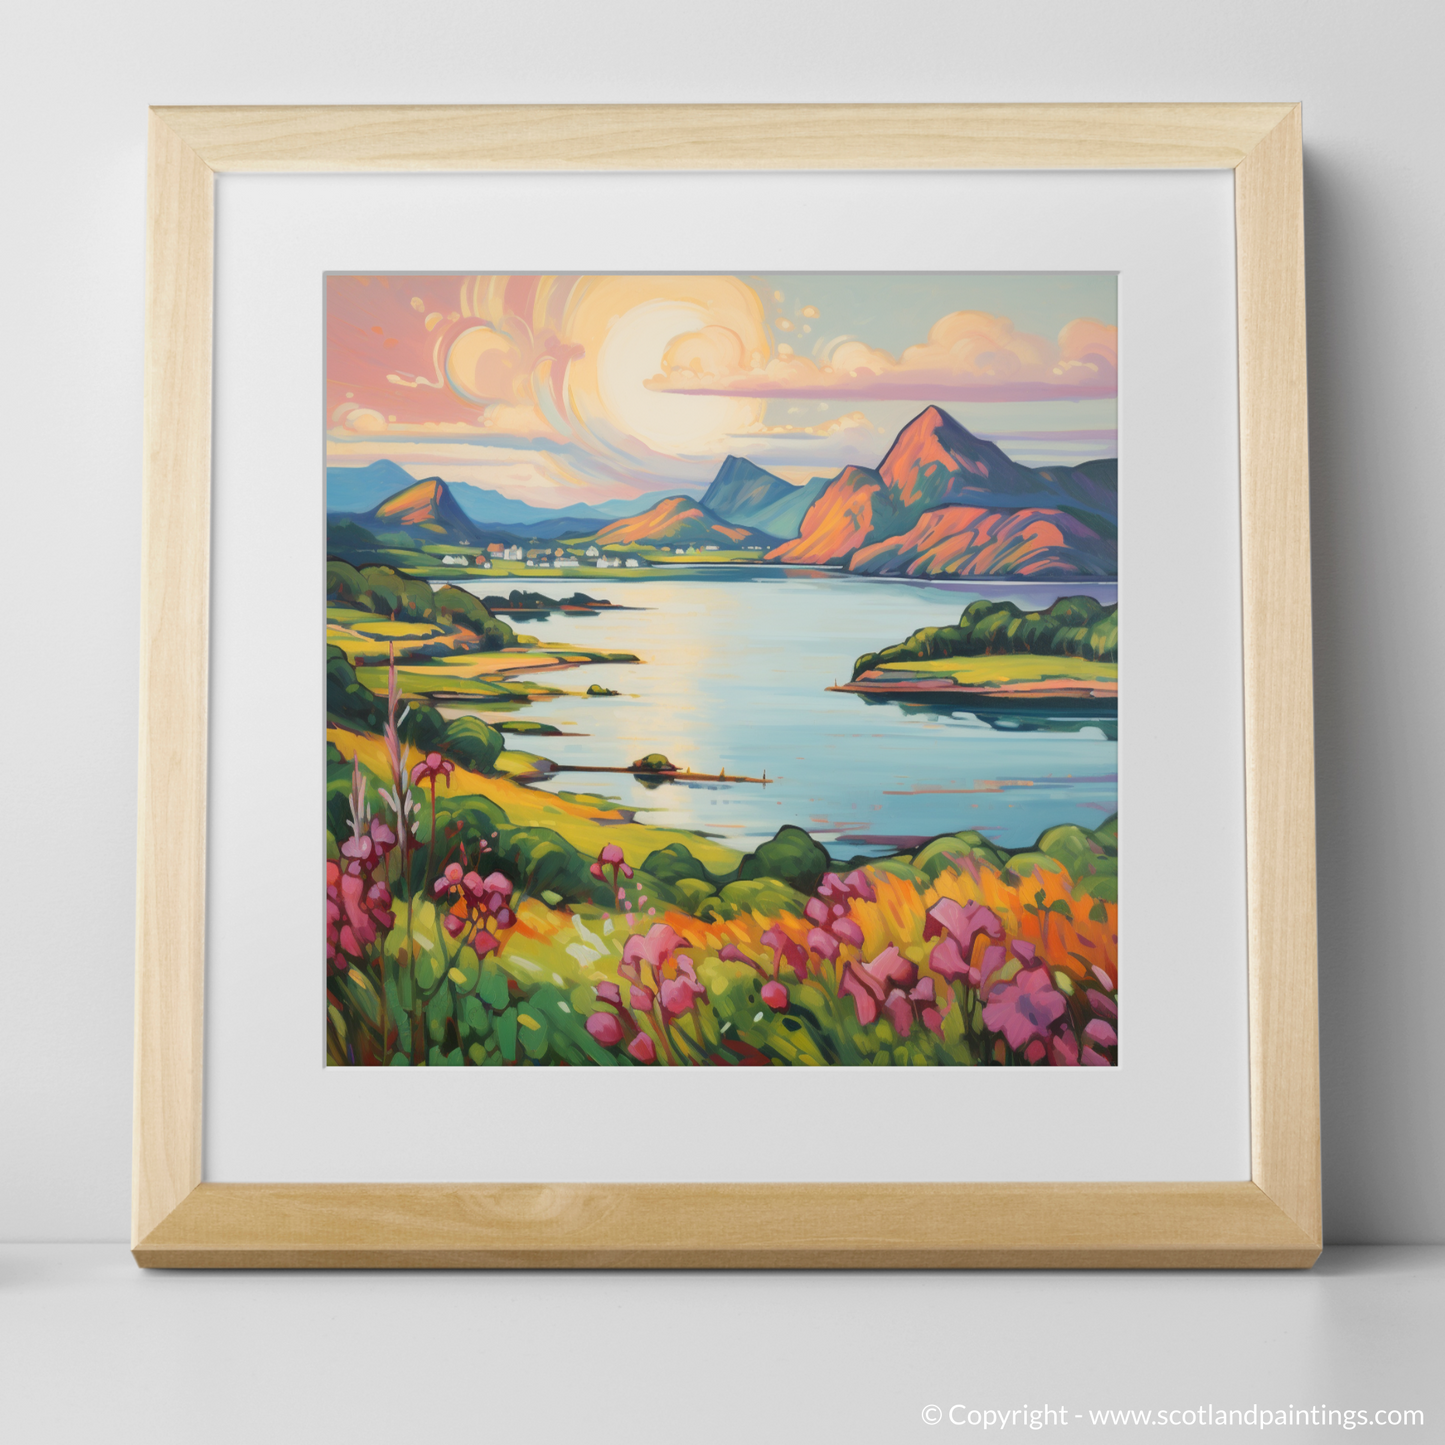 Art Print of Loch Leven, Highlands in summer with a natural frame